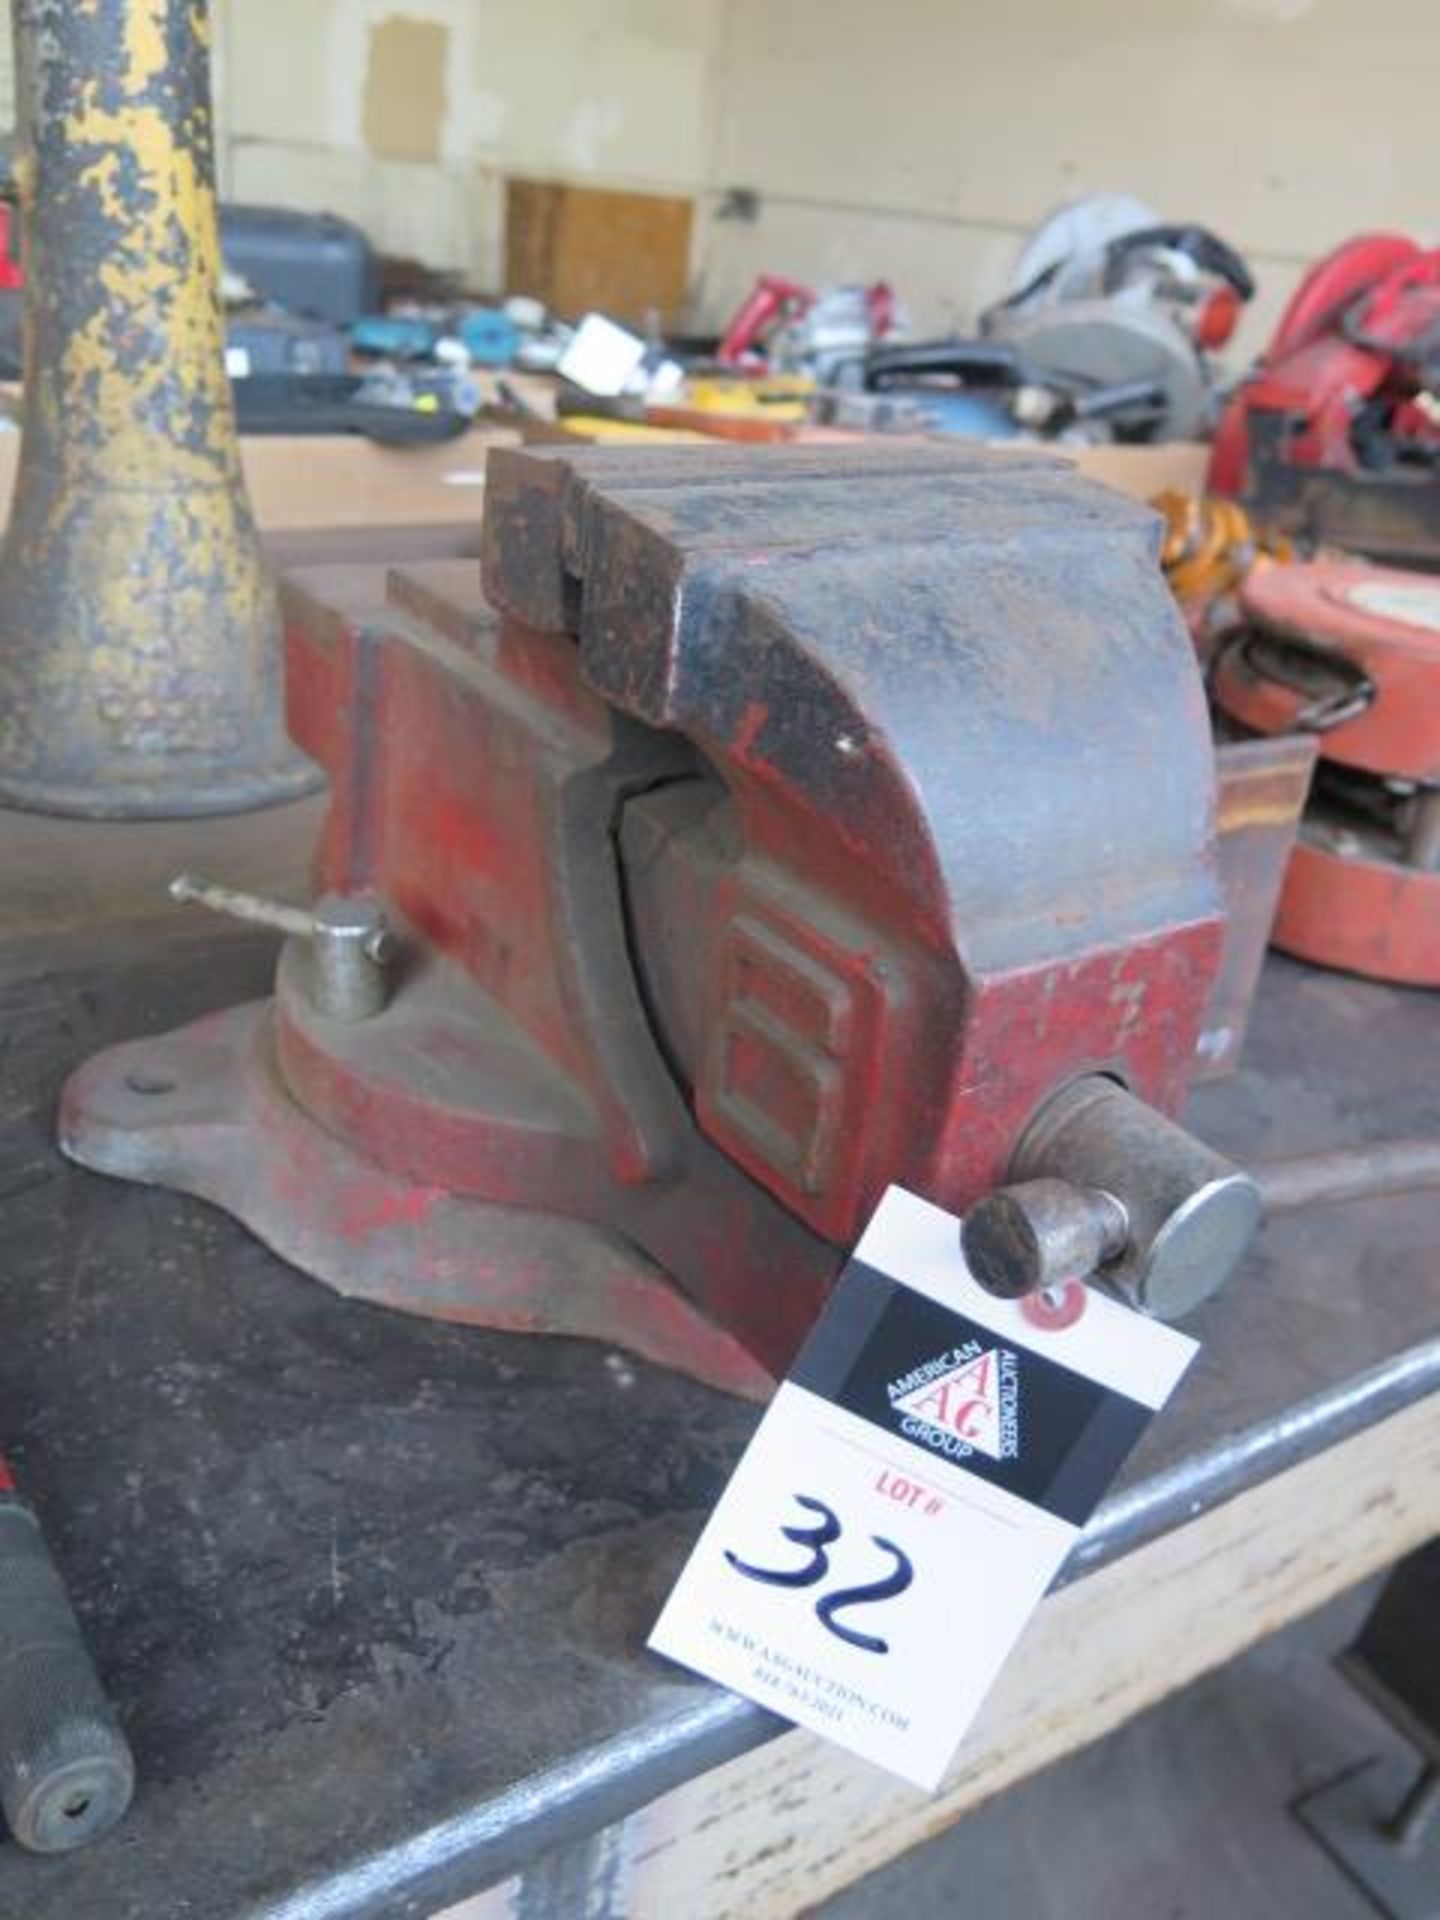 6" Bench Vise (SOLD AS-IS - NO WARRANTY)